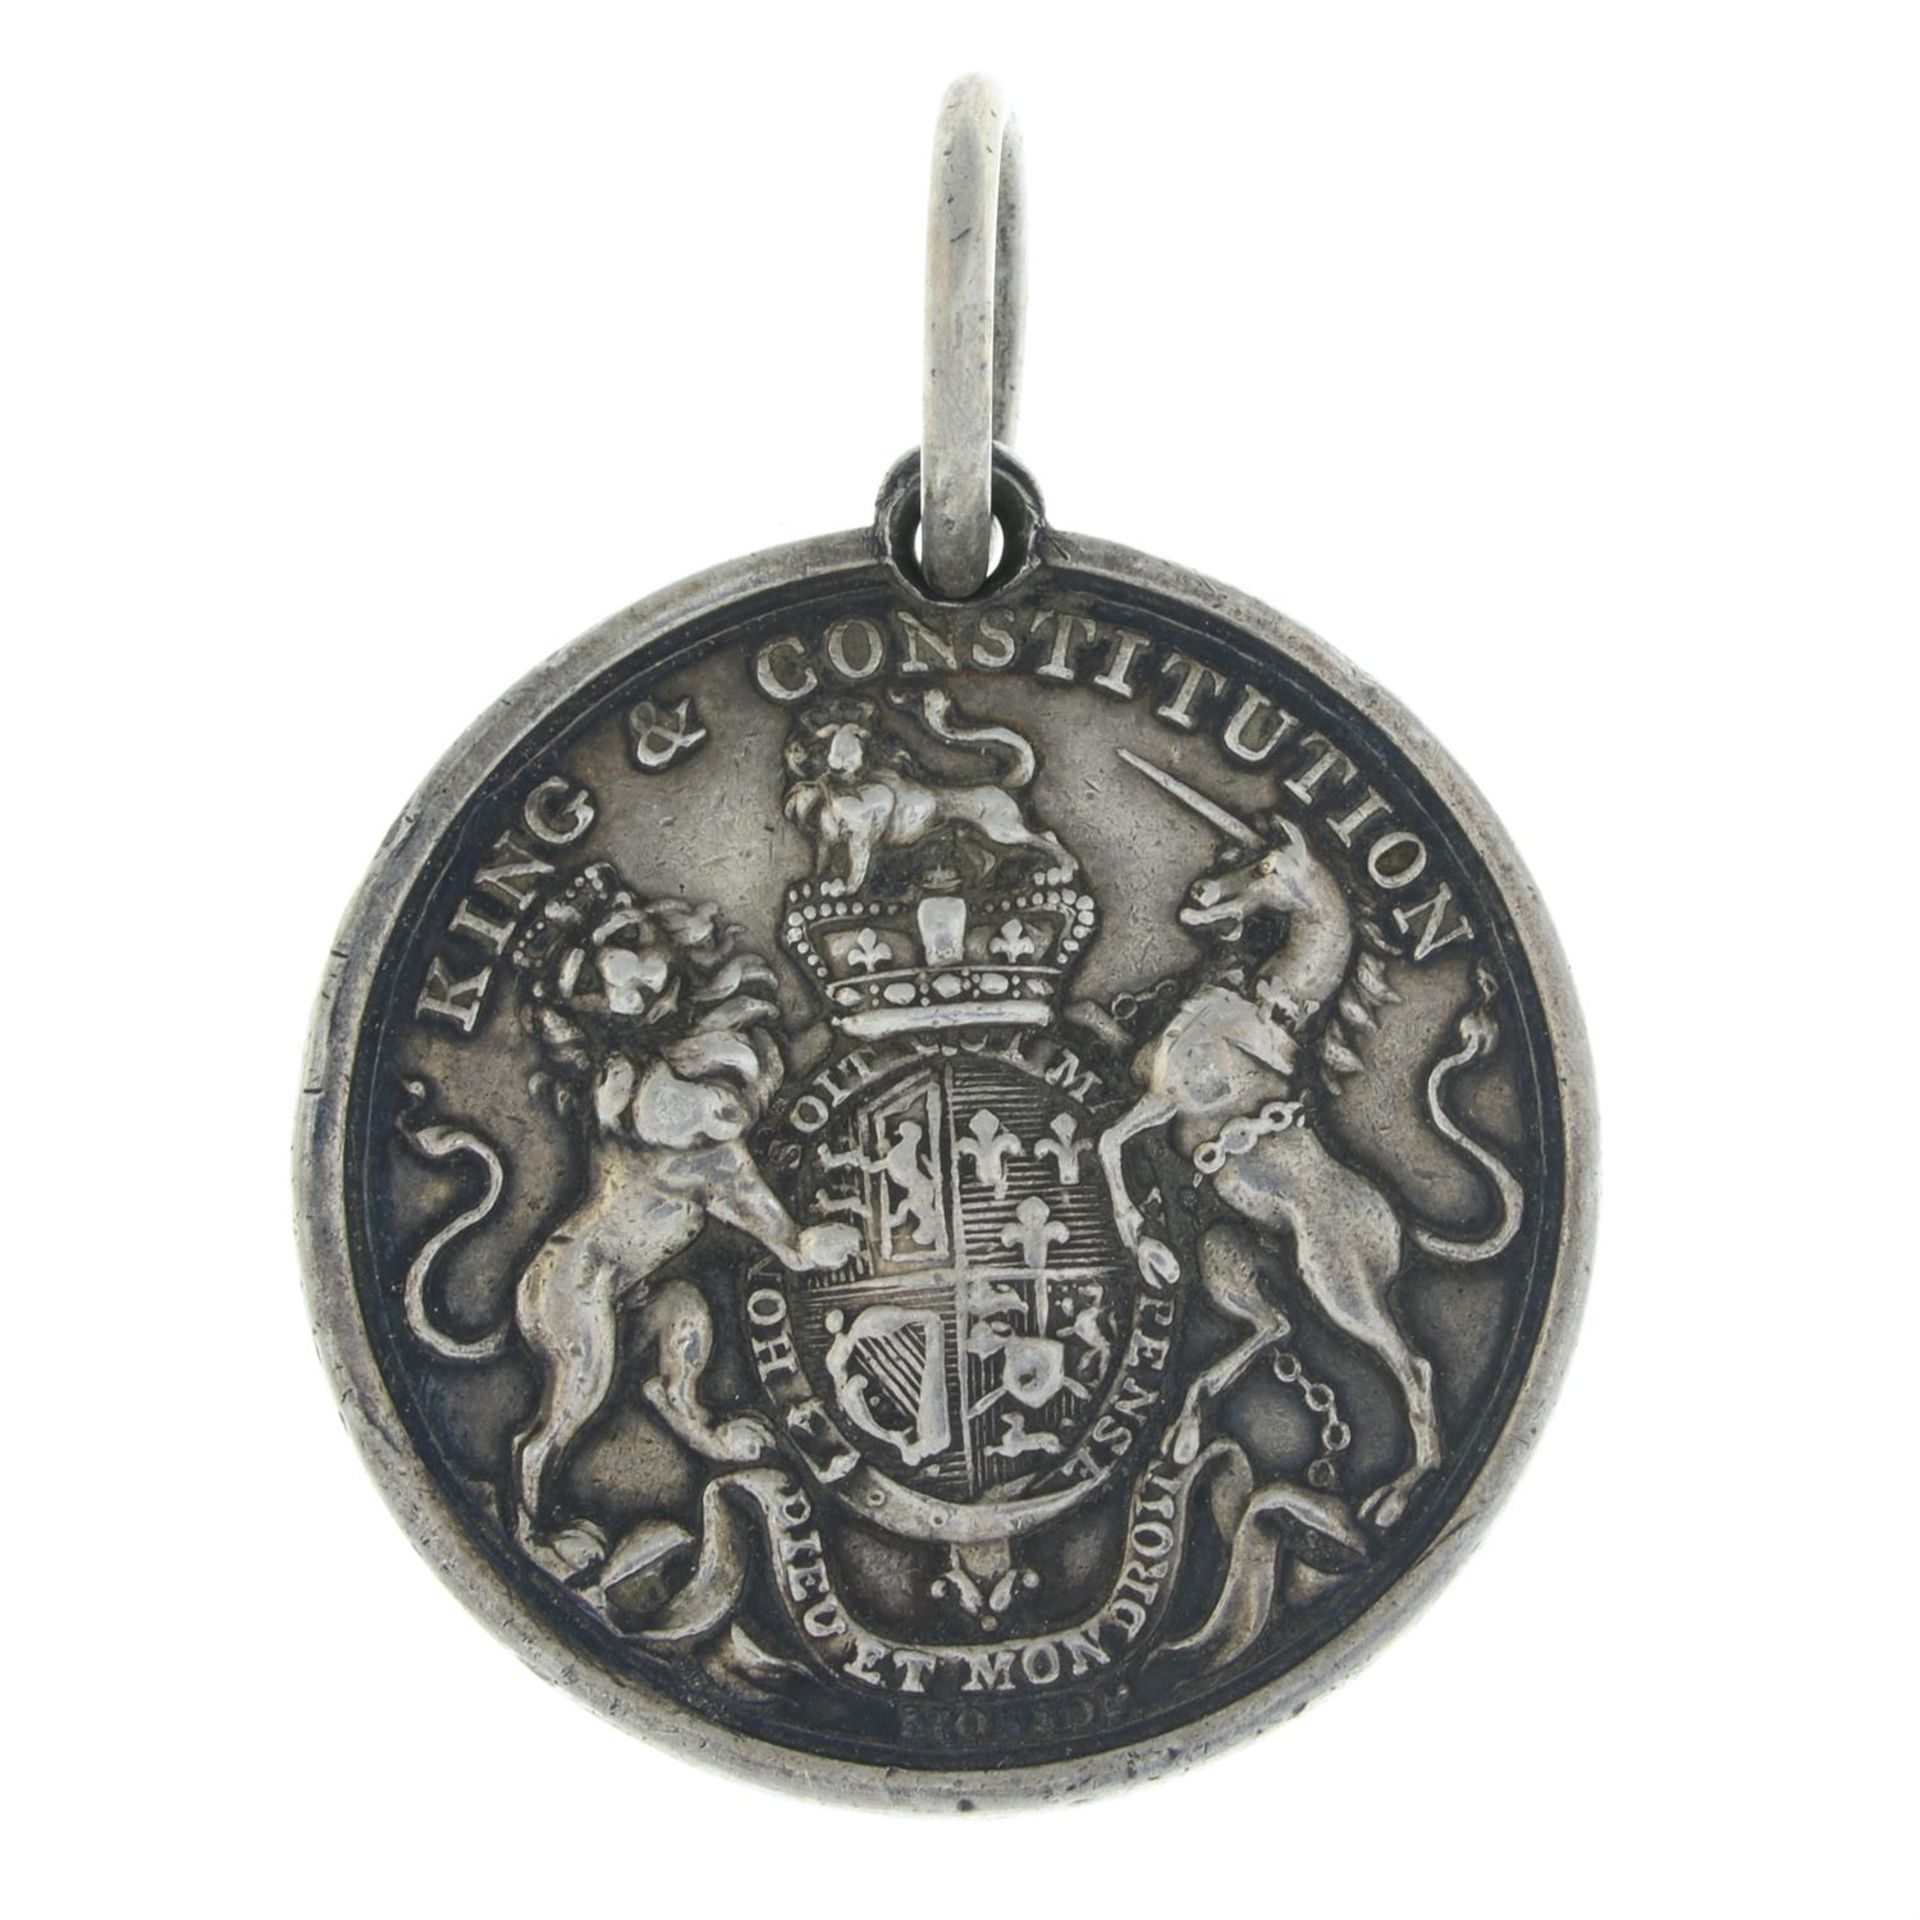 Ireland, William III, King and Constitution 1690, silver medal by W. Mossop. - Image 2 of 2